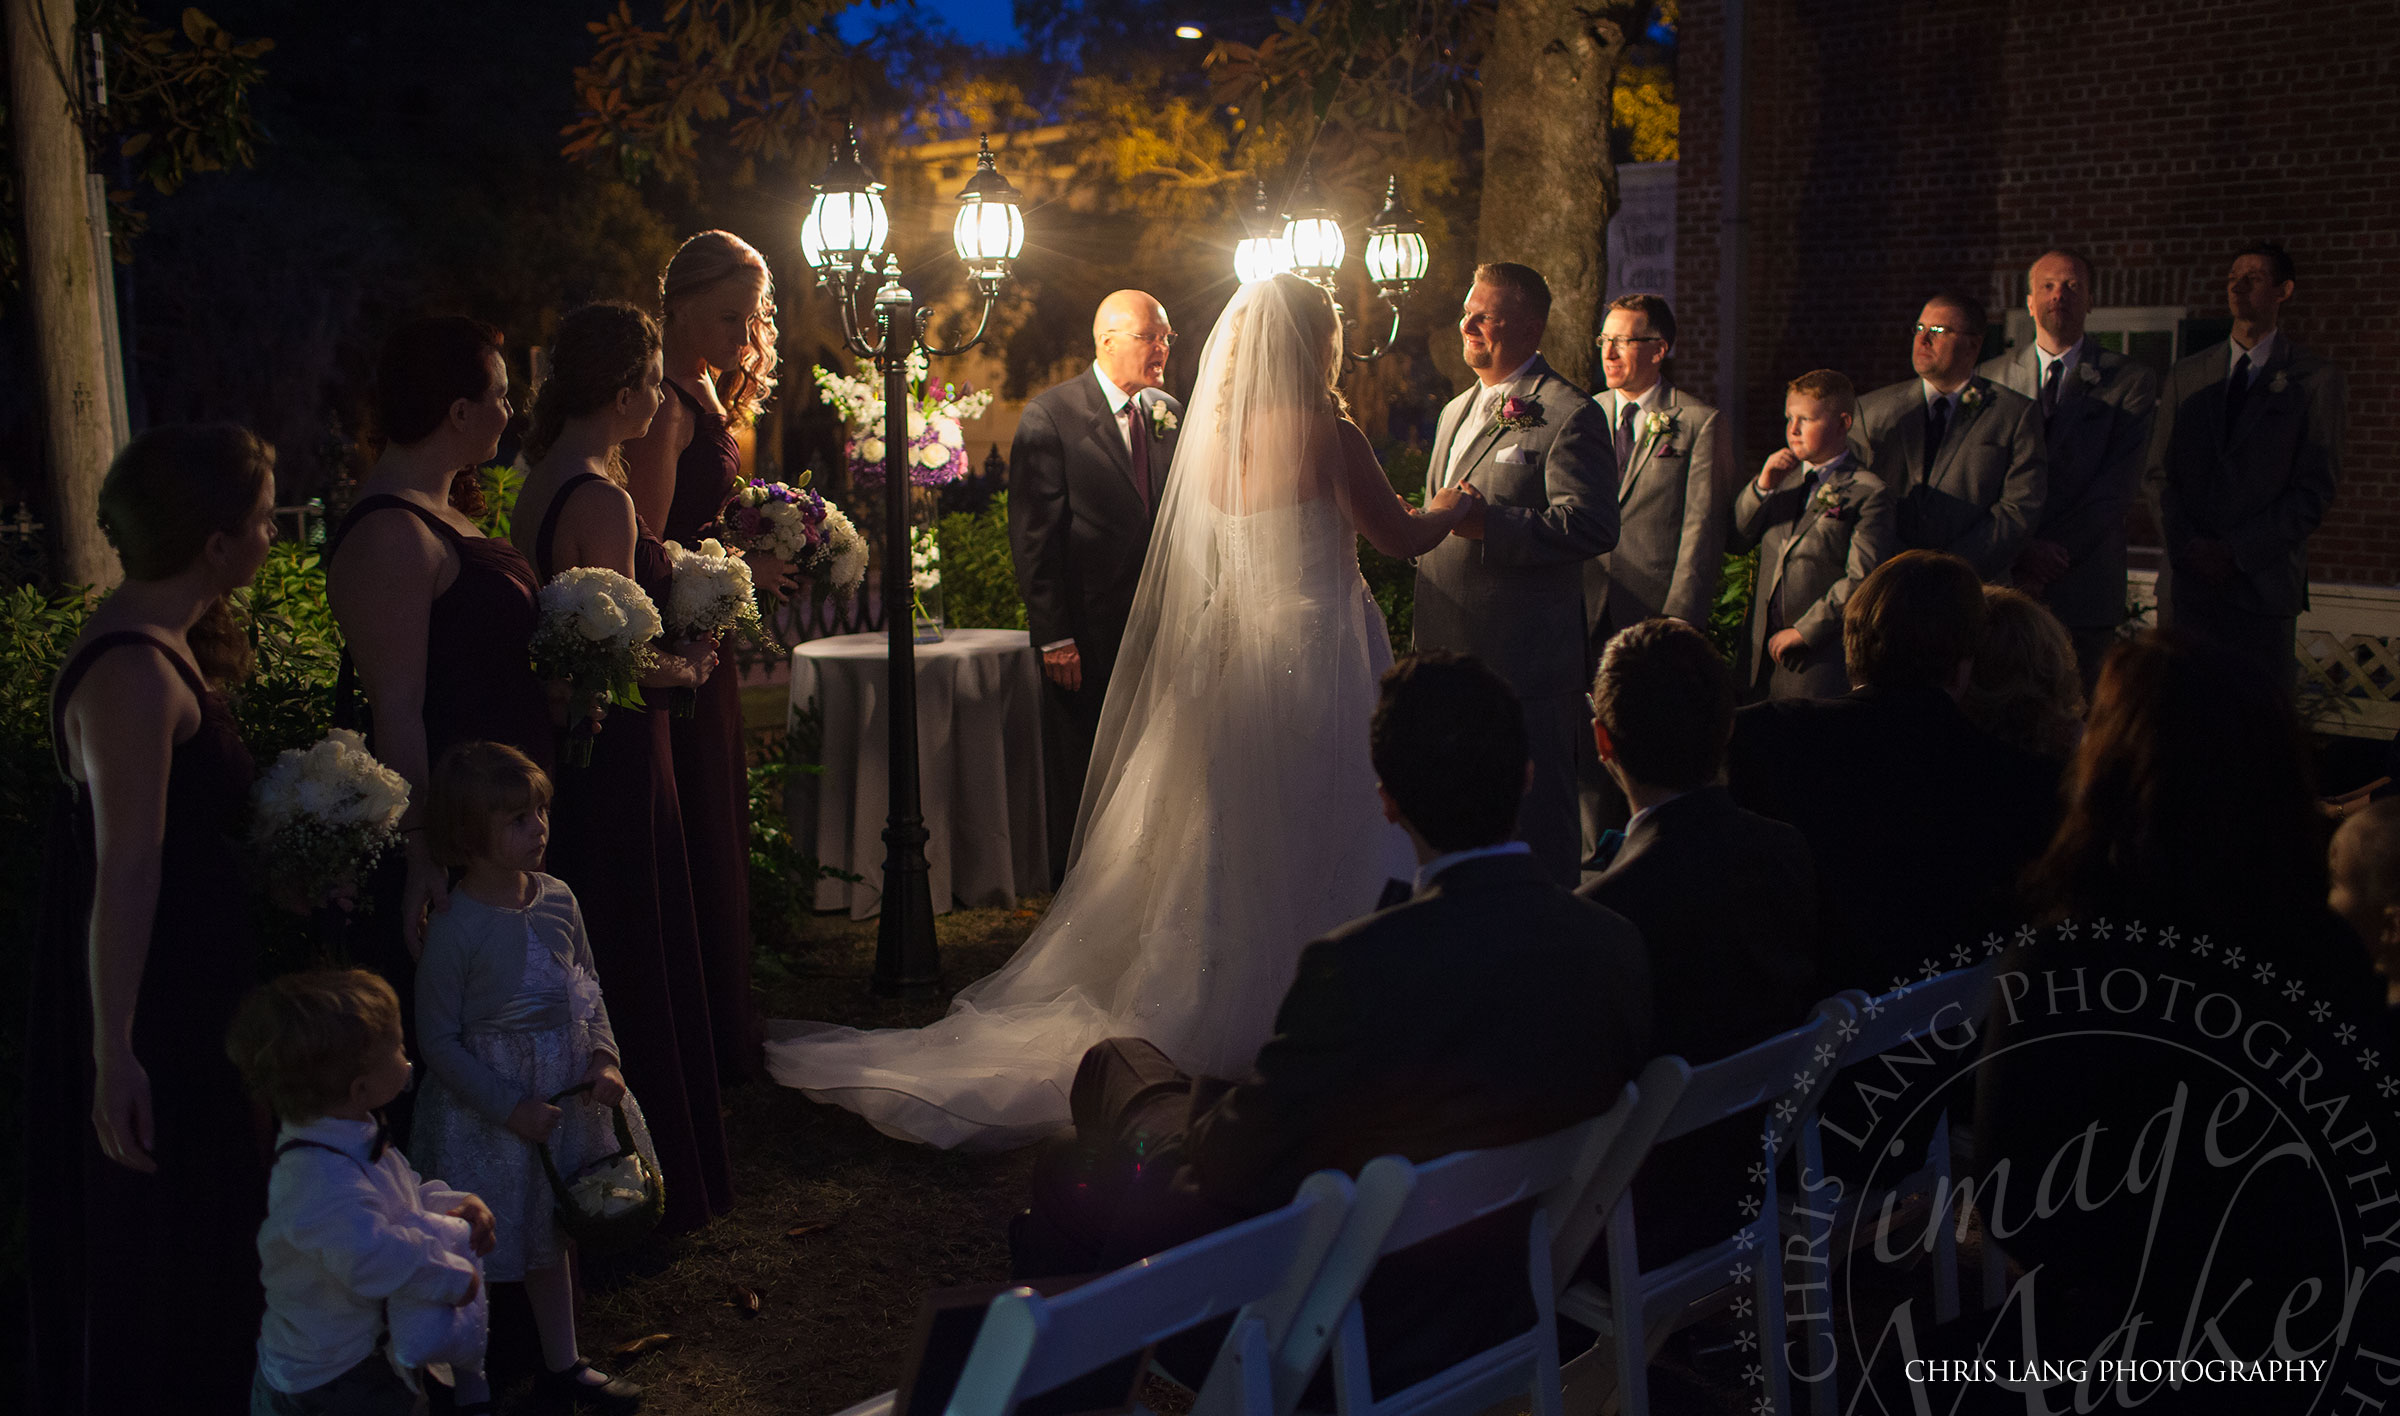 Bellamy Mansion Weddings - Wilmington NC Wedding Venue. photo of a bride and gromm at standing together holding hands during a wedding ceremony at the Bellamy Mansion at night. Wilmington NC Photographer